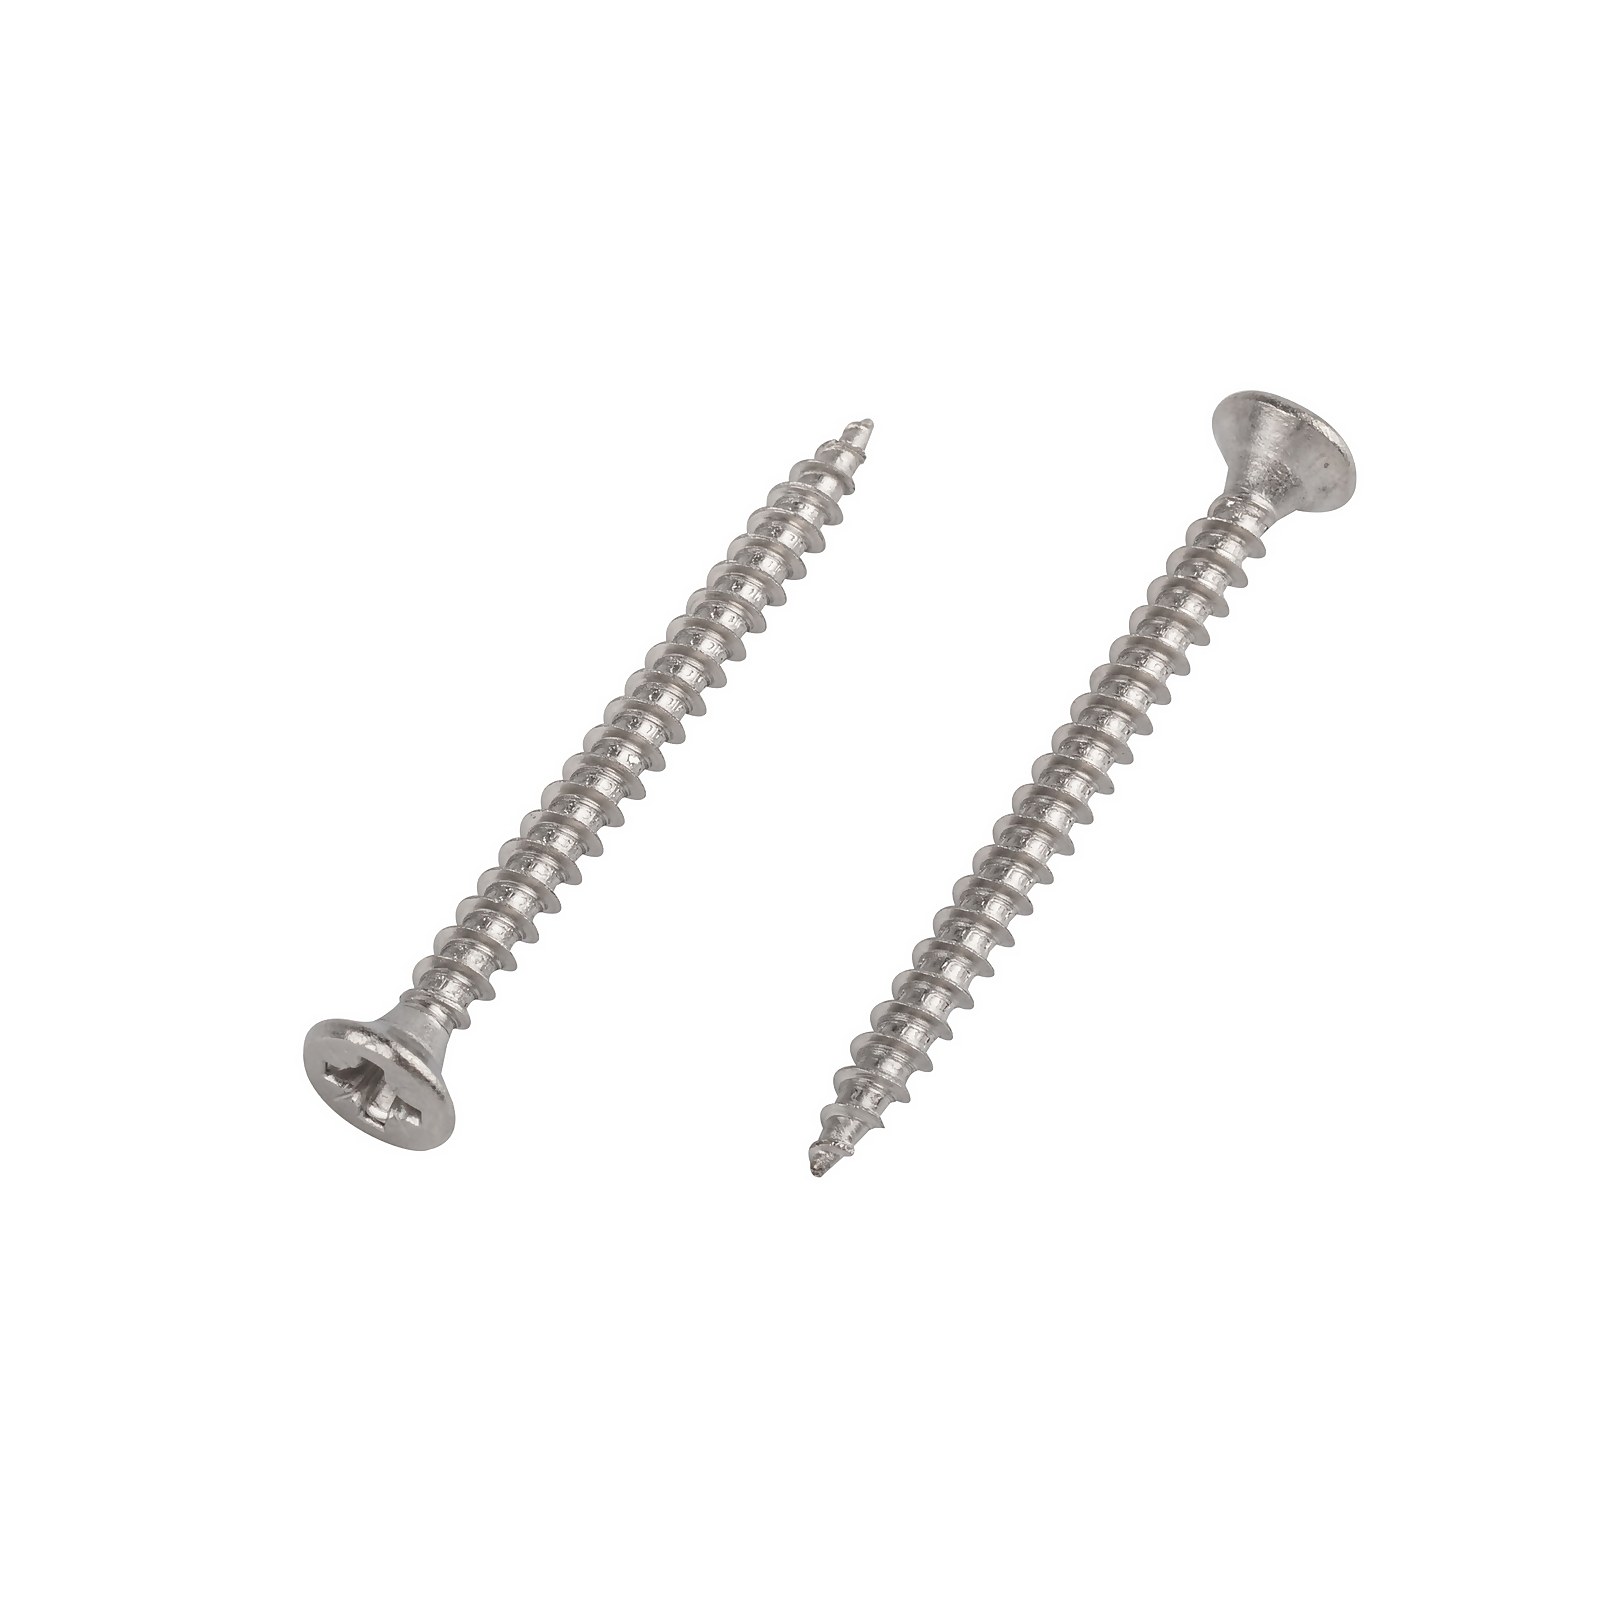 Photo of Homebase Stainless Steel Single Thread Screw 3.5 X 40mm 100 Pack